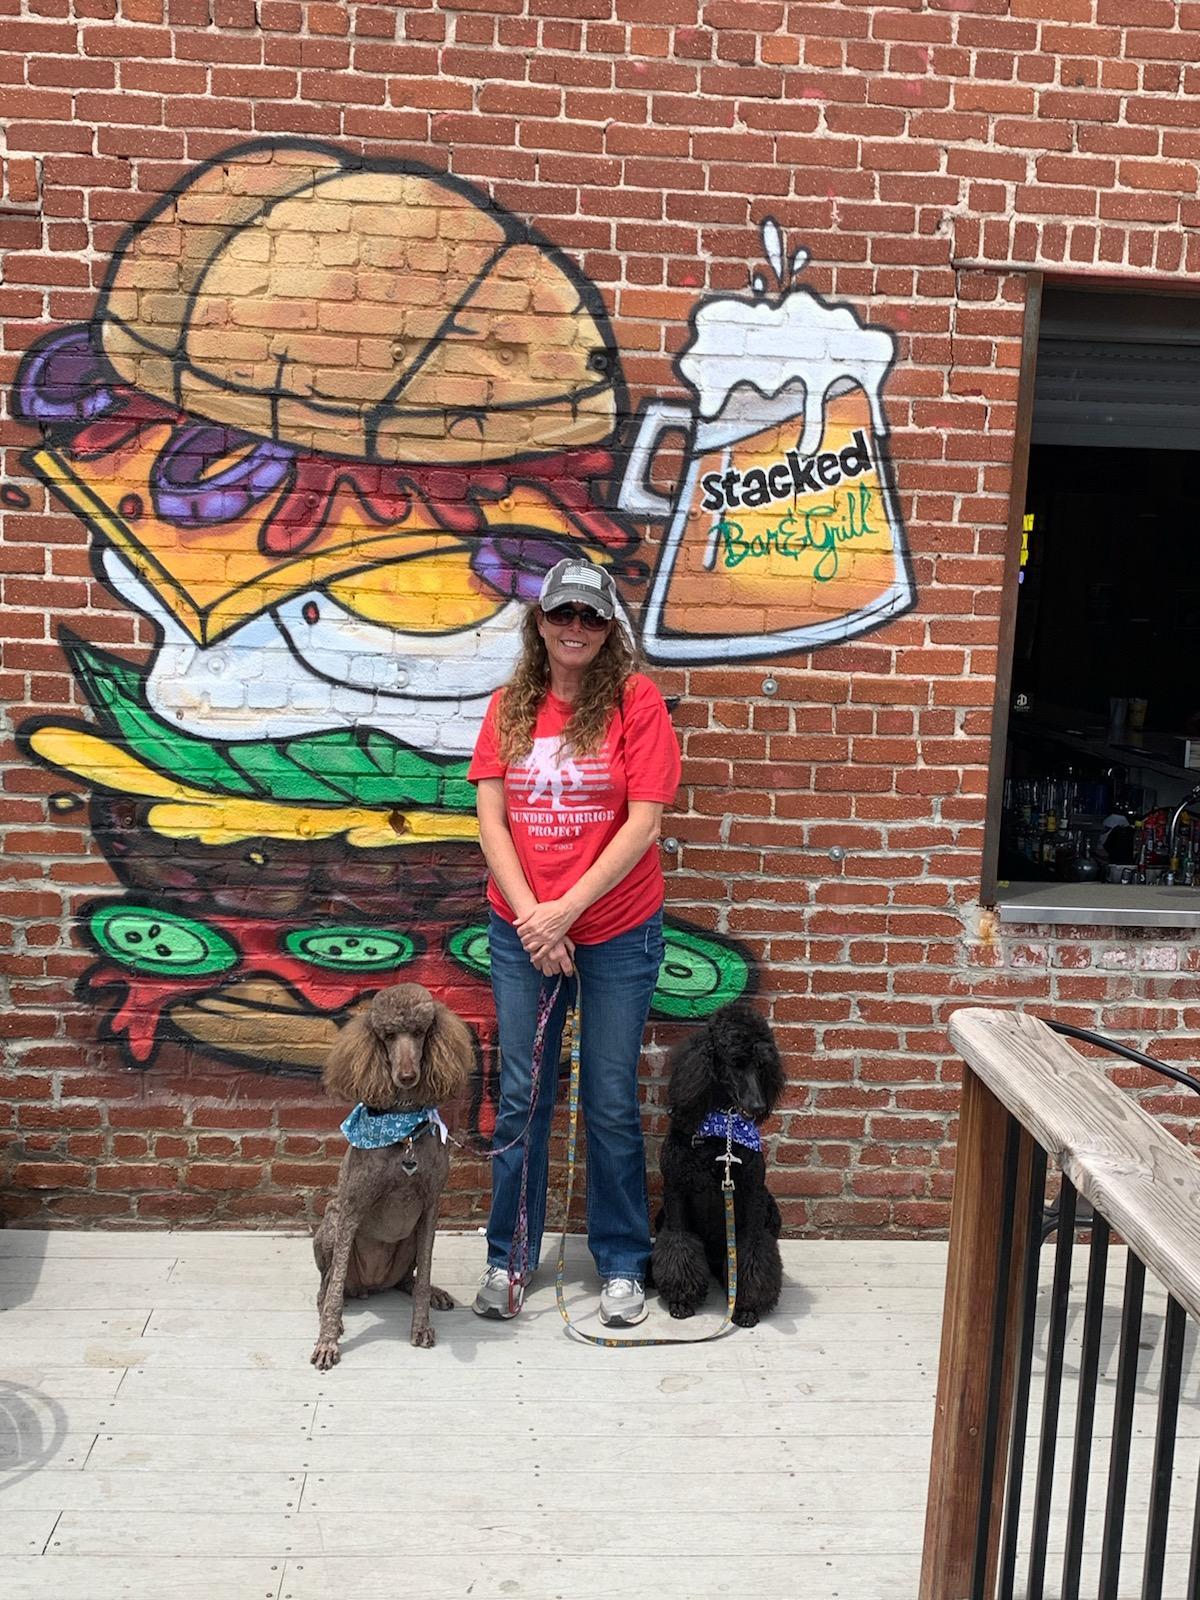 Pet Friendly Stacked Bar & Grill